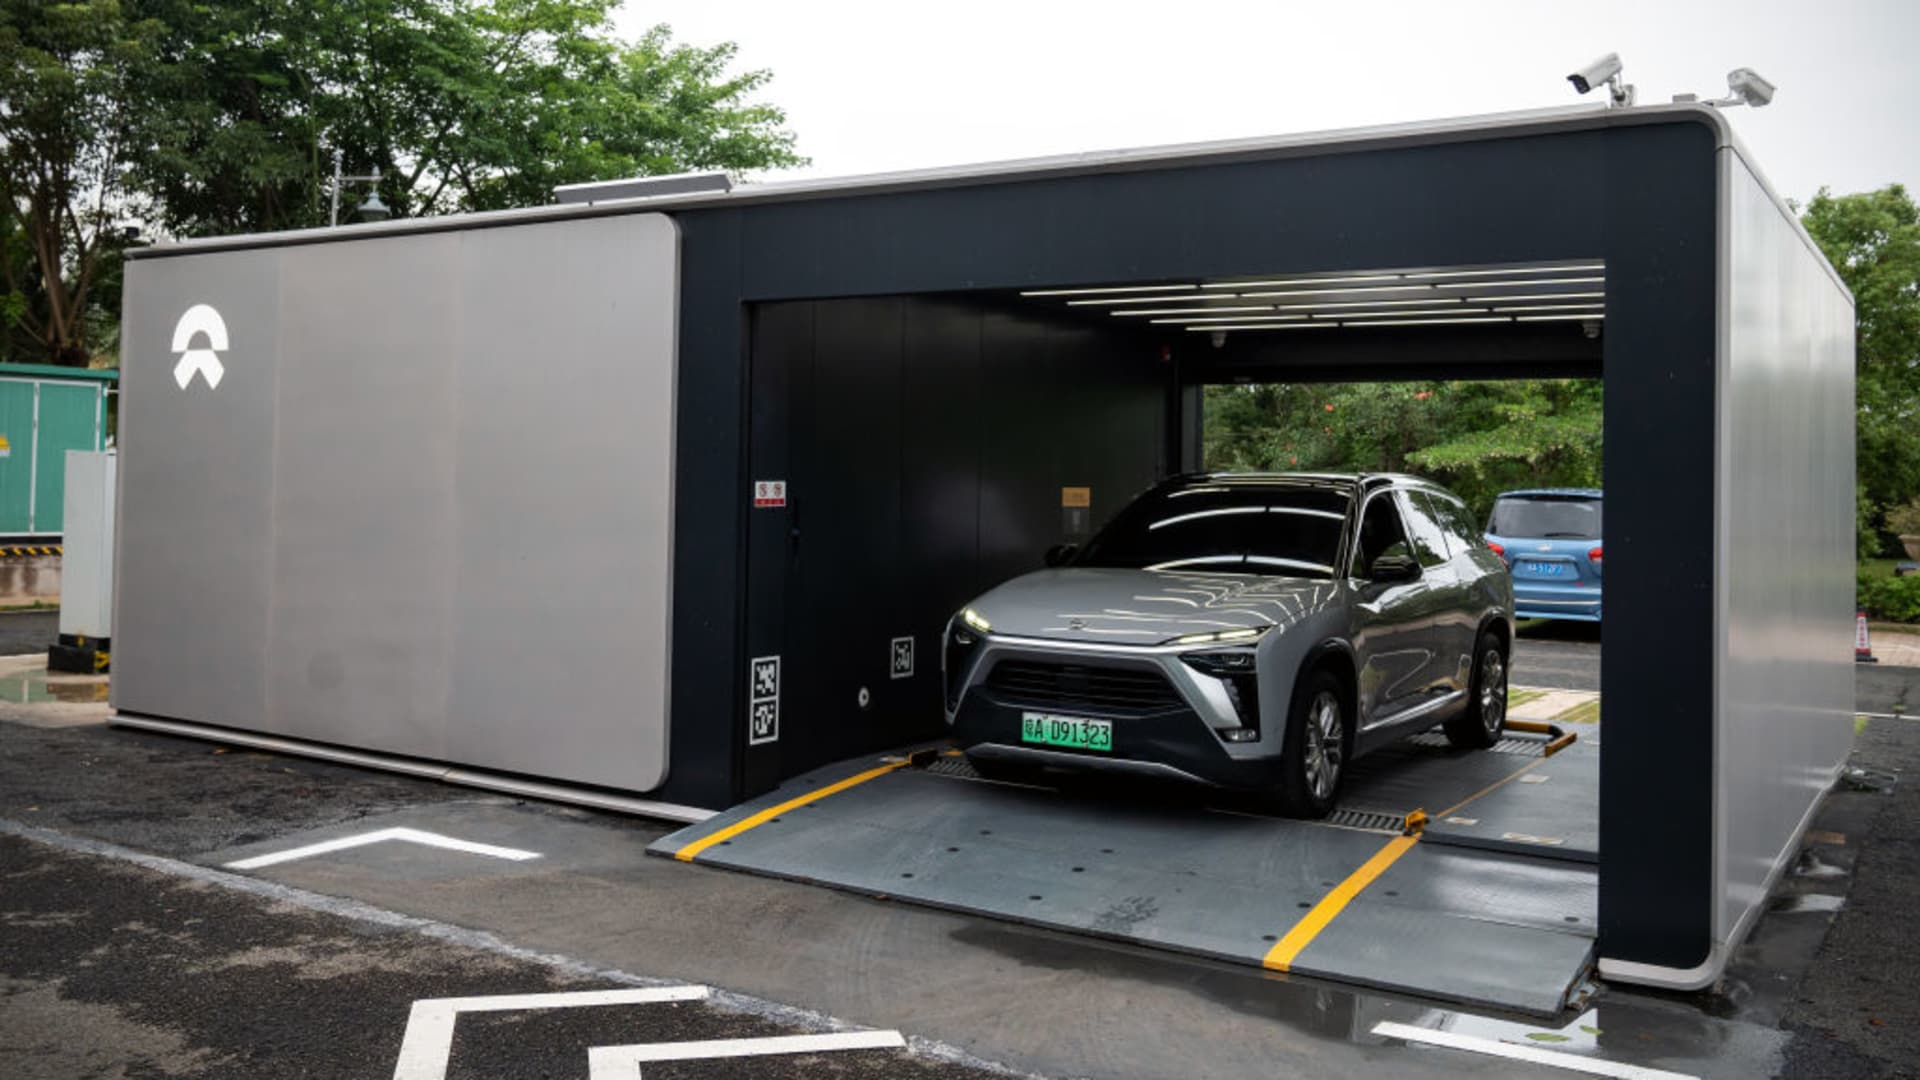 China's Nio looks to expand battery swap services to gain an edge on EV infrastructure